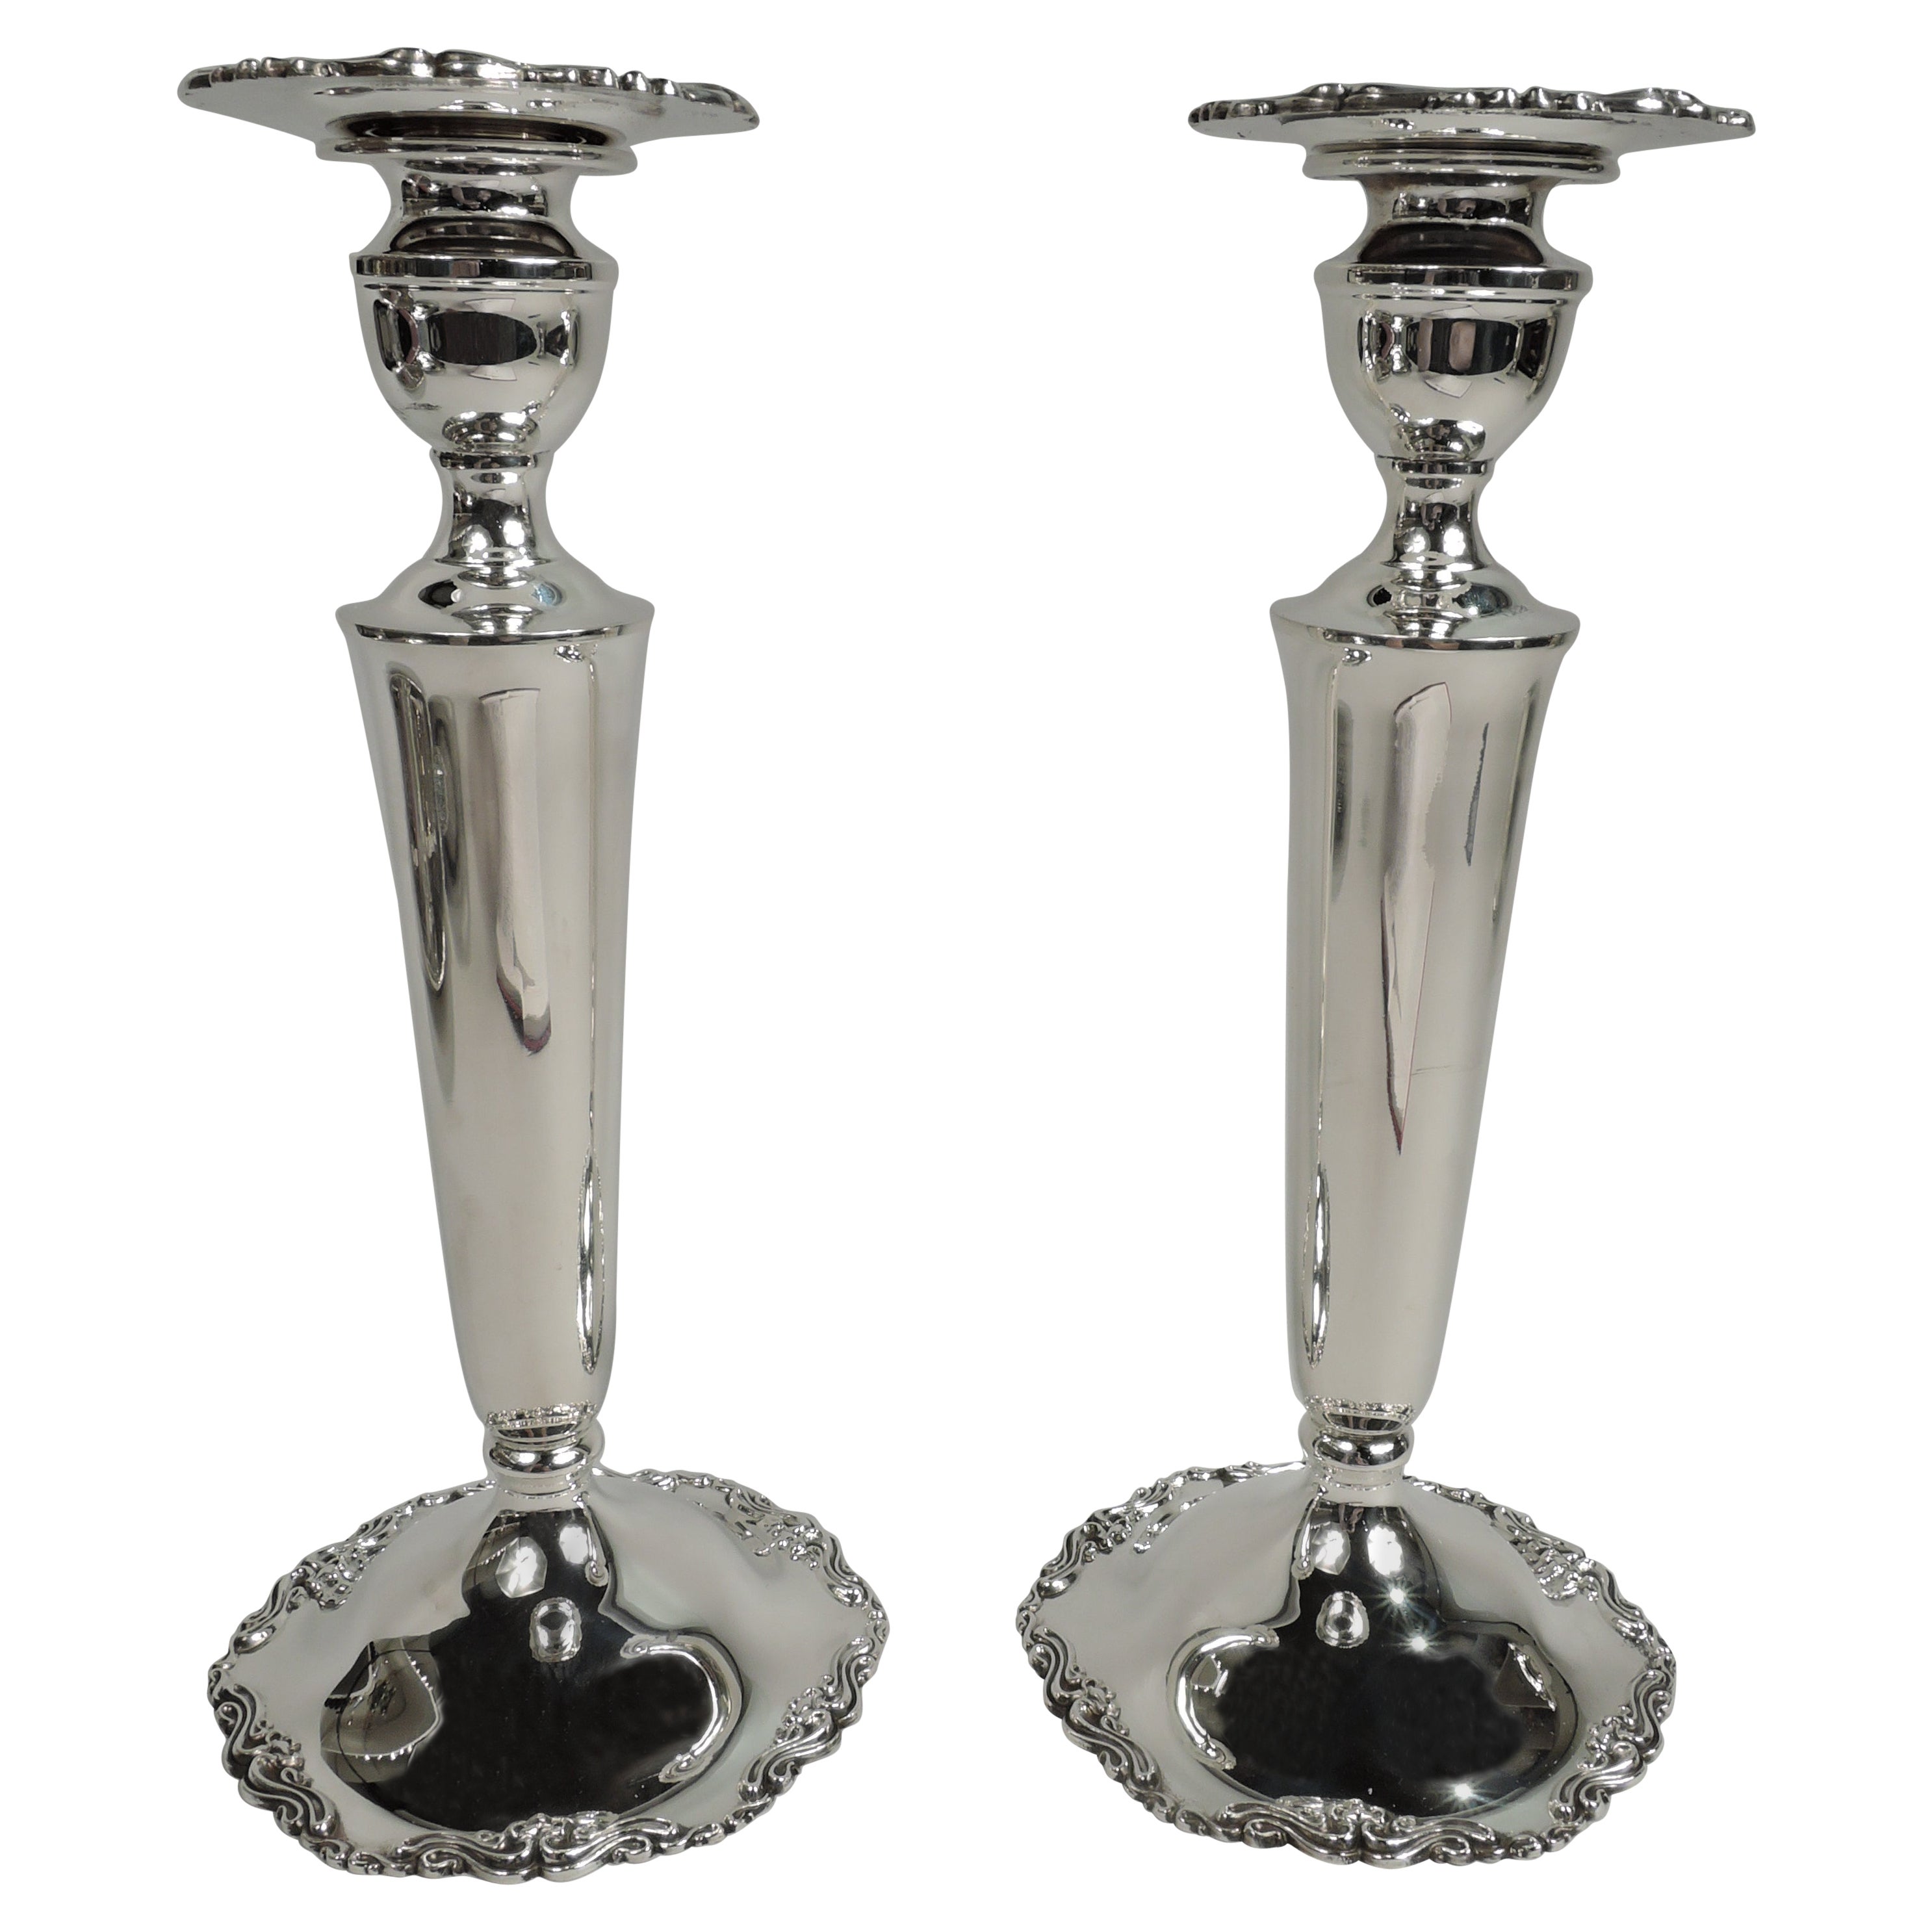 Pair of Pretty American Edwardian Sterling Silver Candlesticks